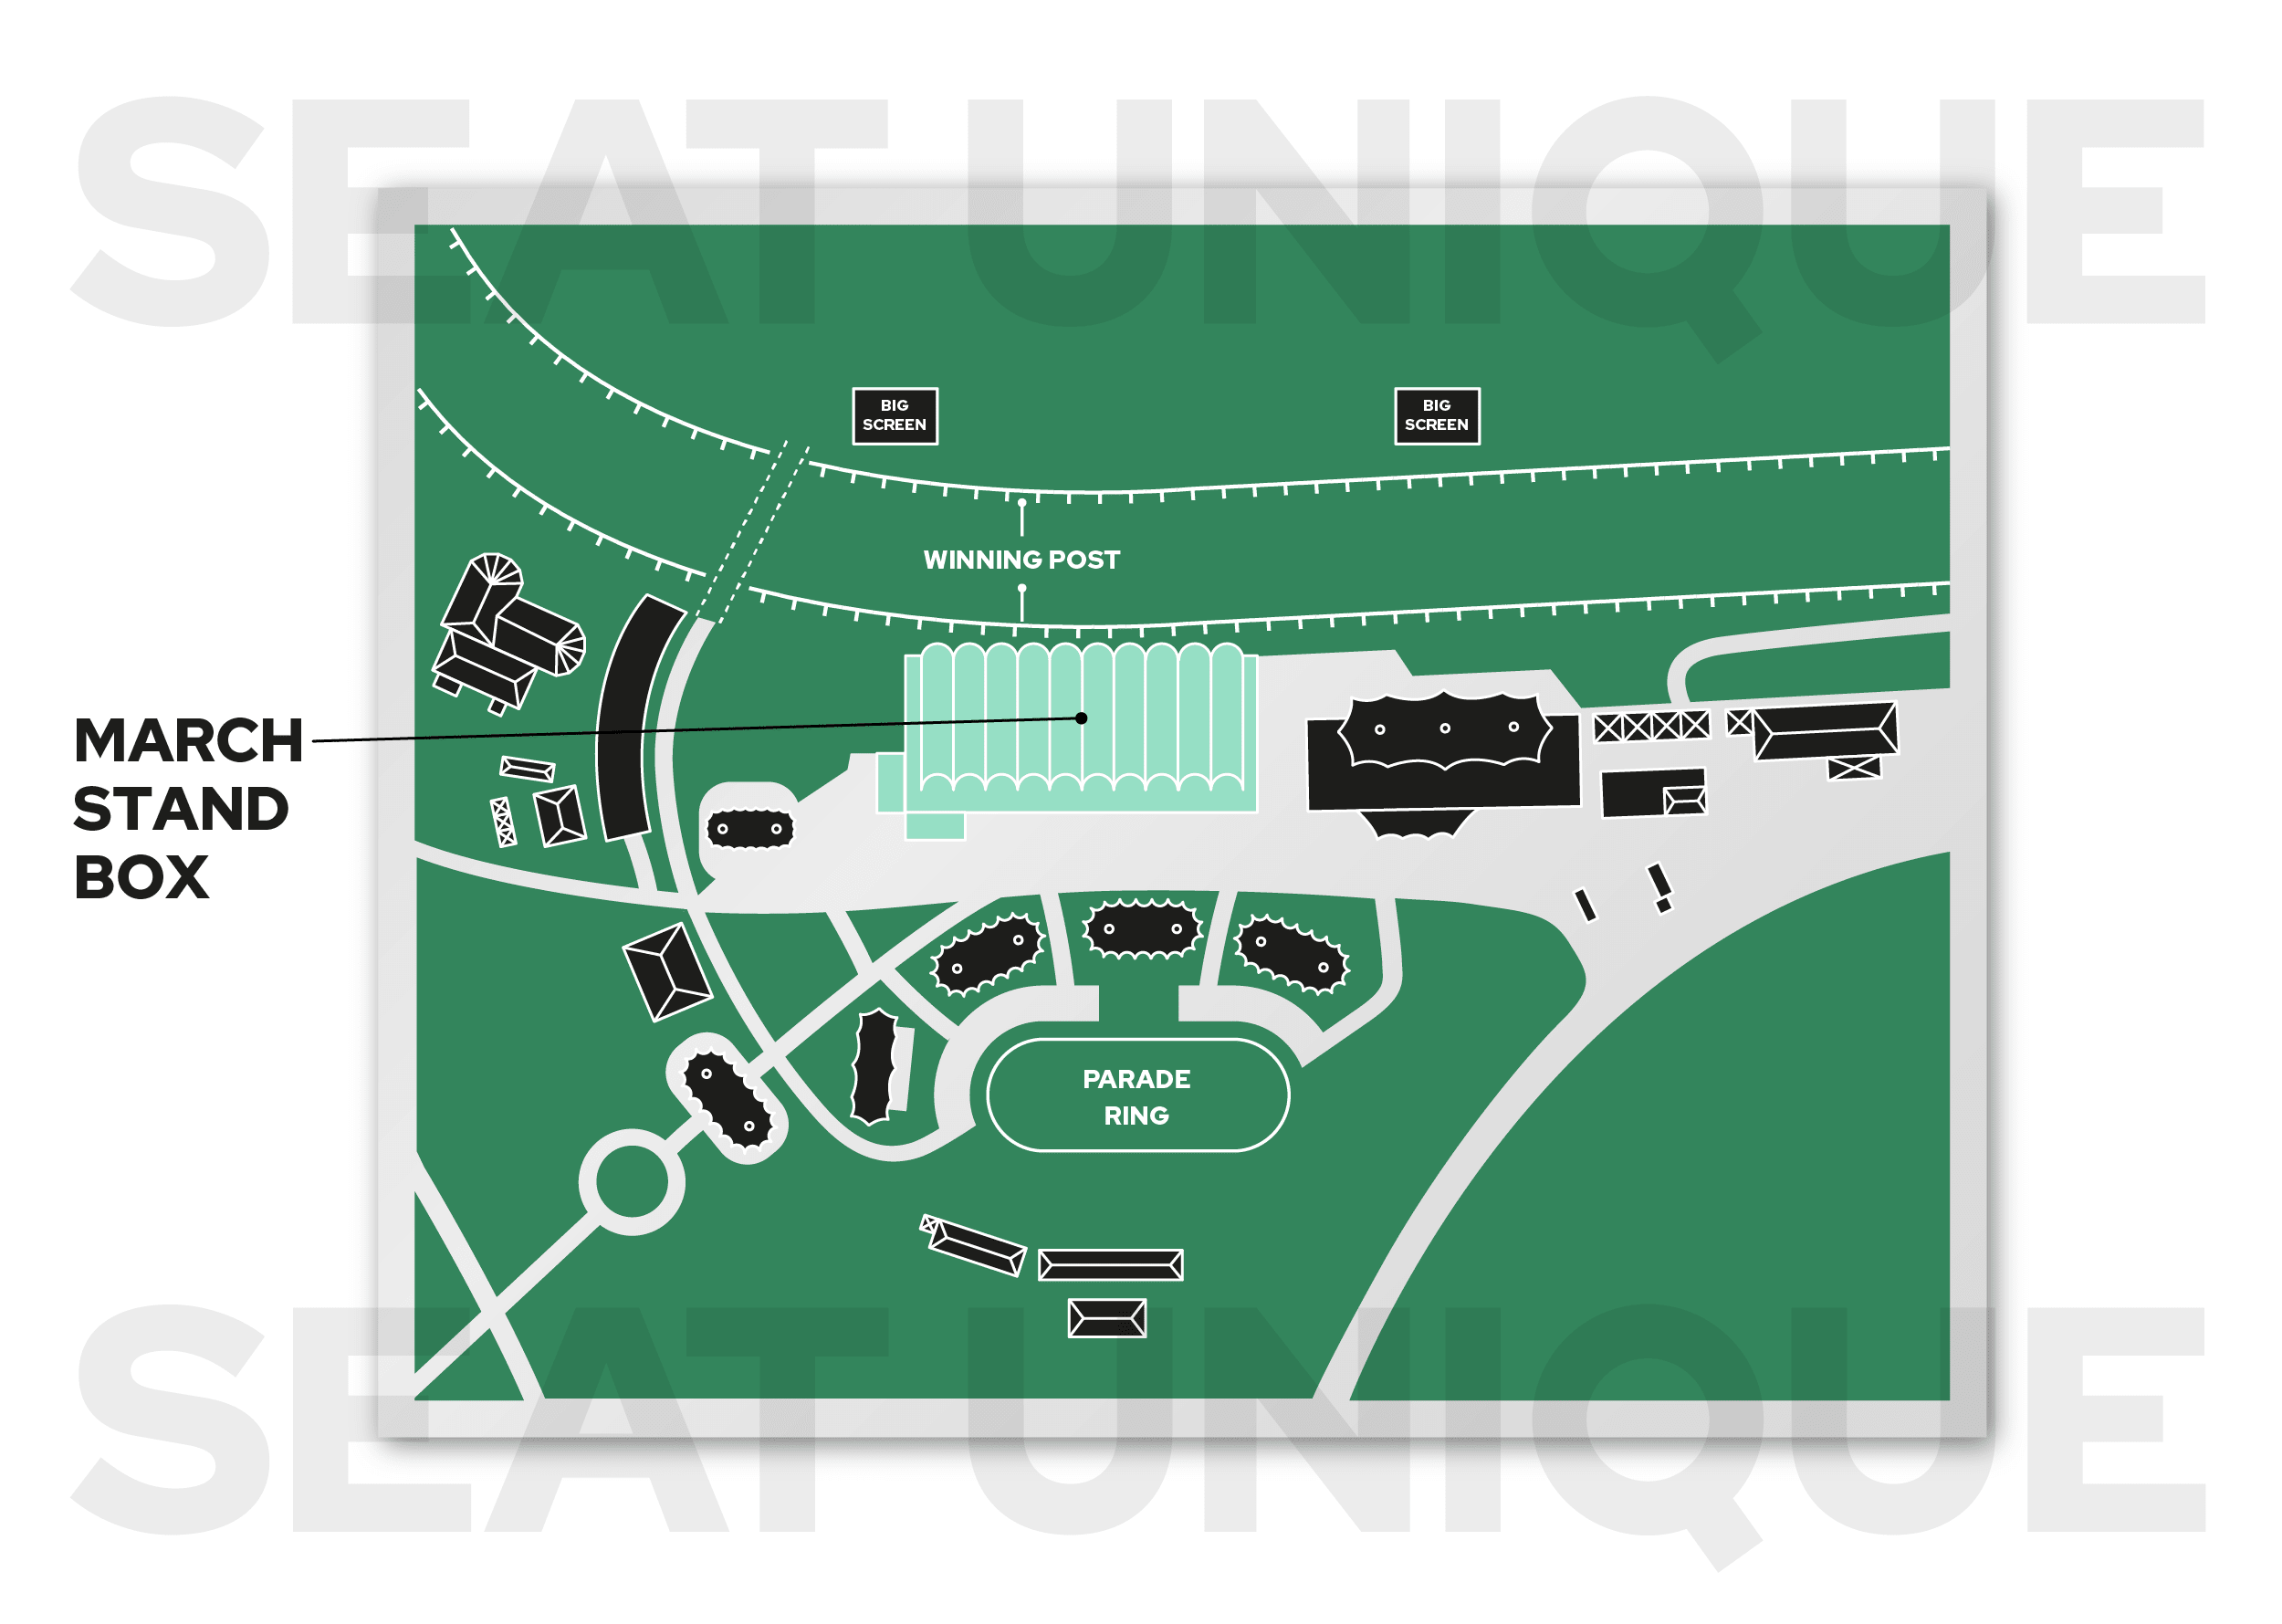 The location of the March Stand Boxes on the Qatar Goodwood Festival map